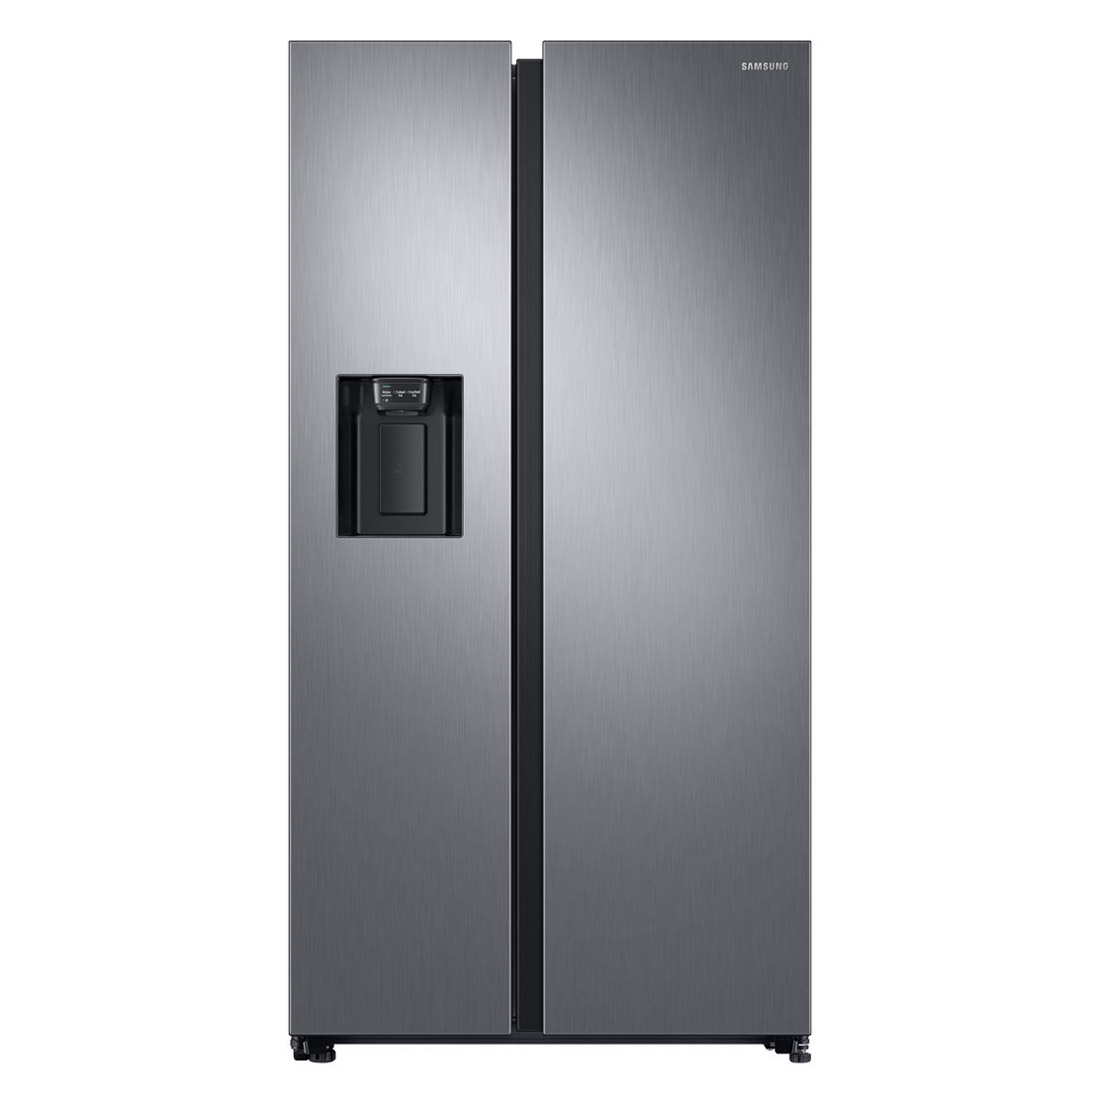 Image of Samsung RS68N8220S9 American Fridge Freezer in Silver PL I W F Rated